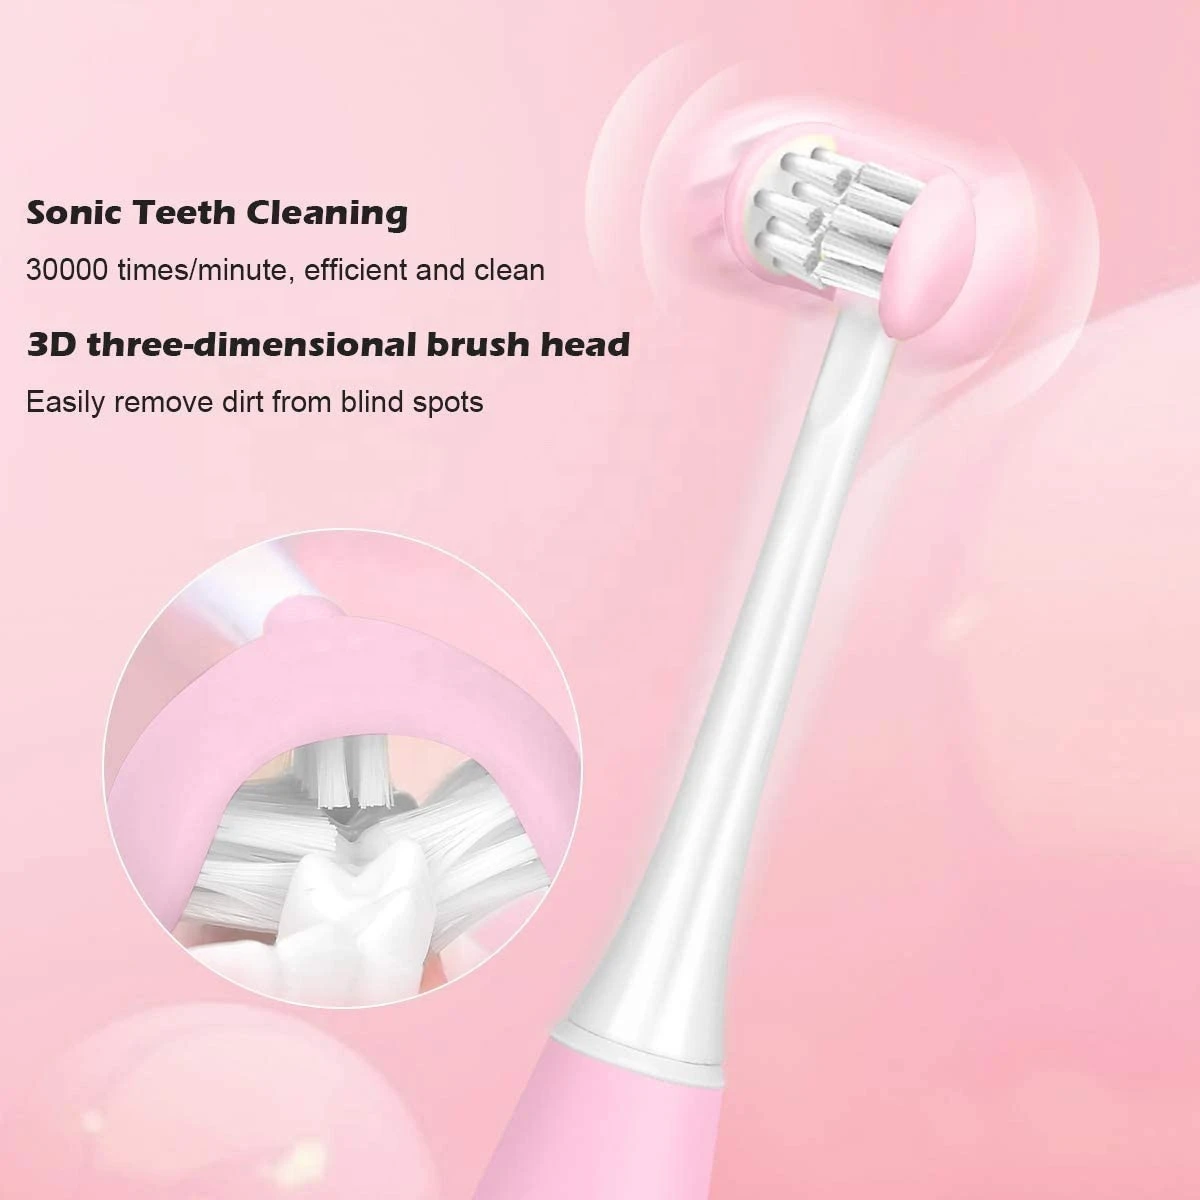 2020 NEW SOFT-BRISTLED INTELLIGENT SONIC U-SHAPED electric toothbrush for children